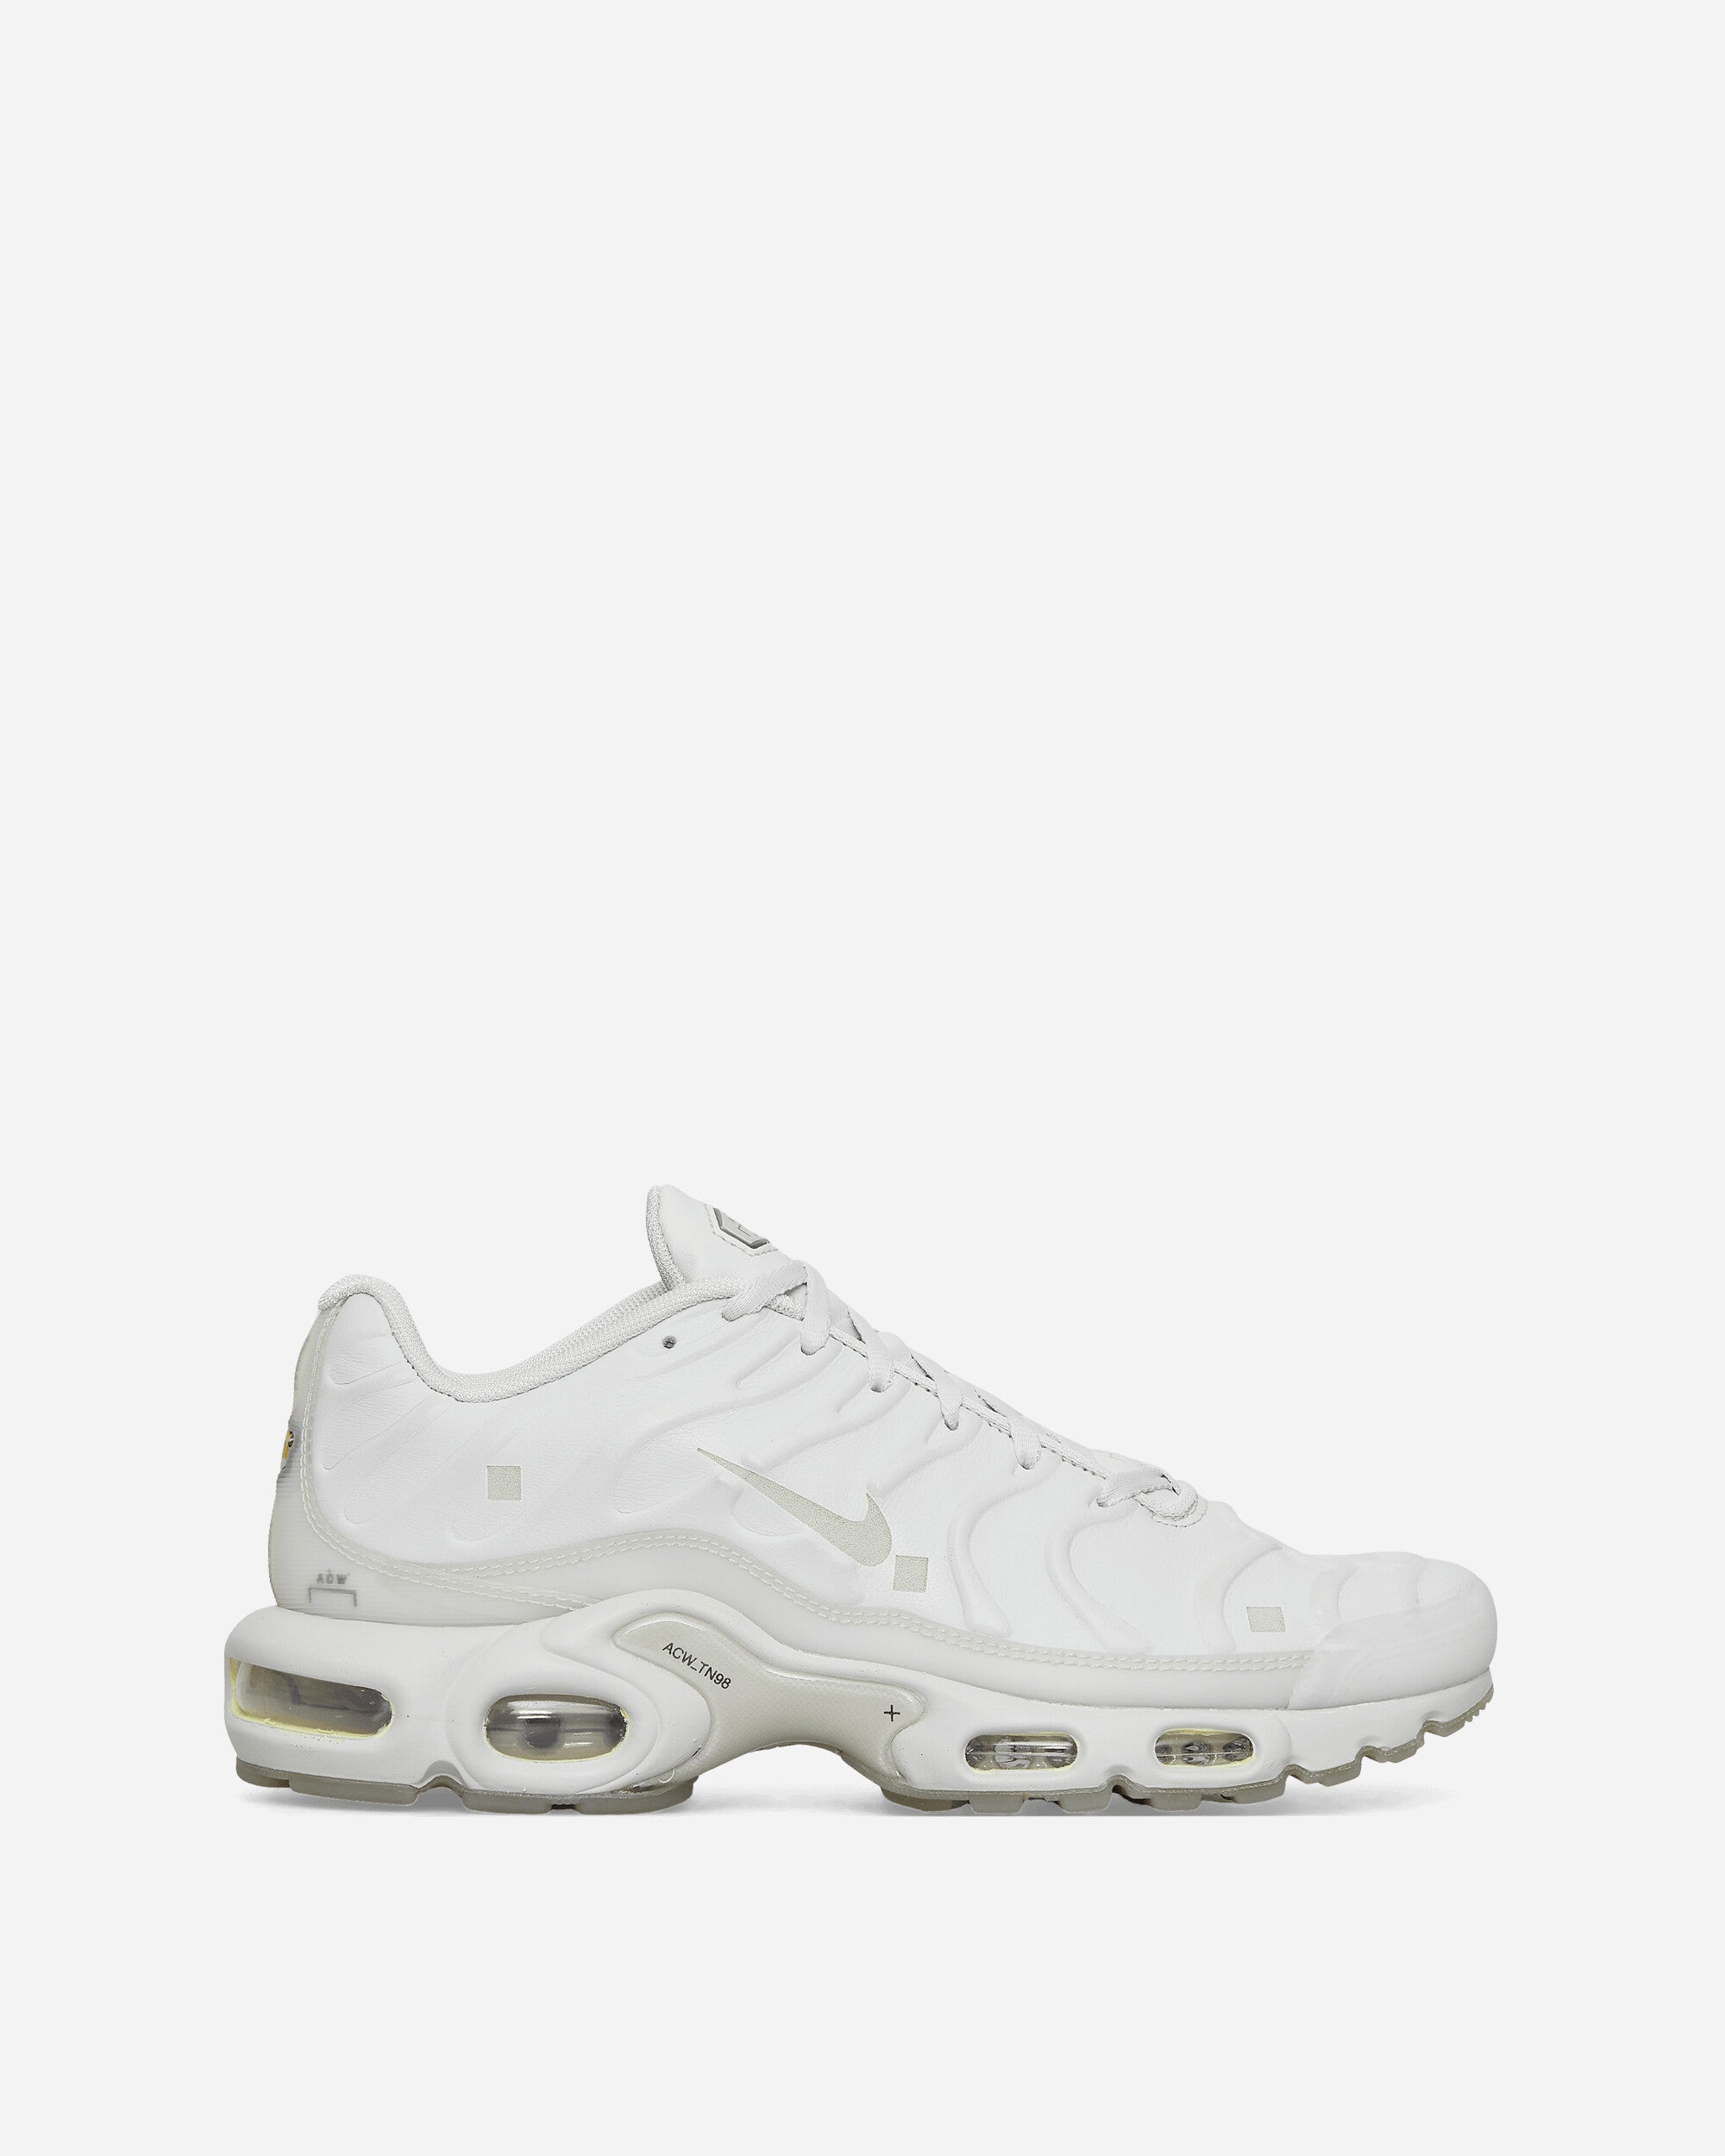 A-COLD-WALL* Air Max Plus Sneakers Stone